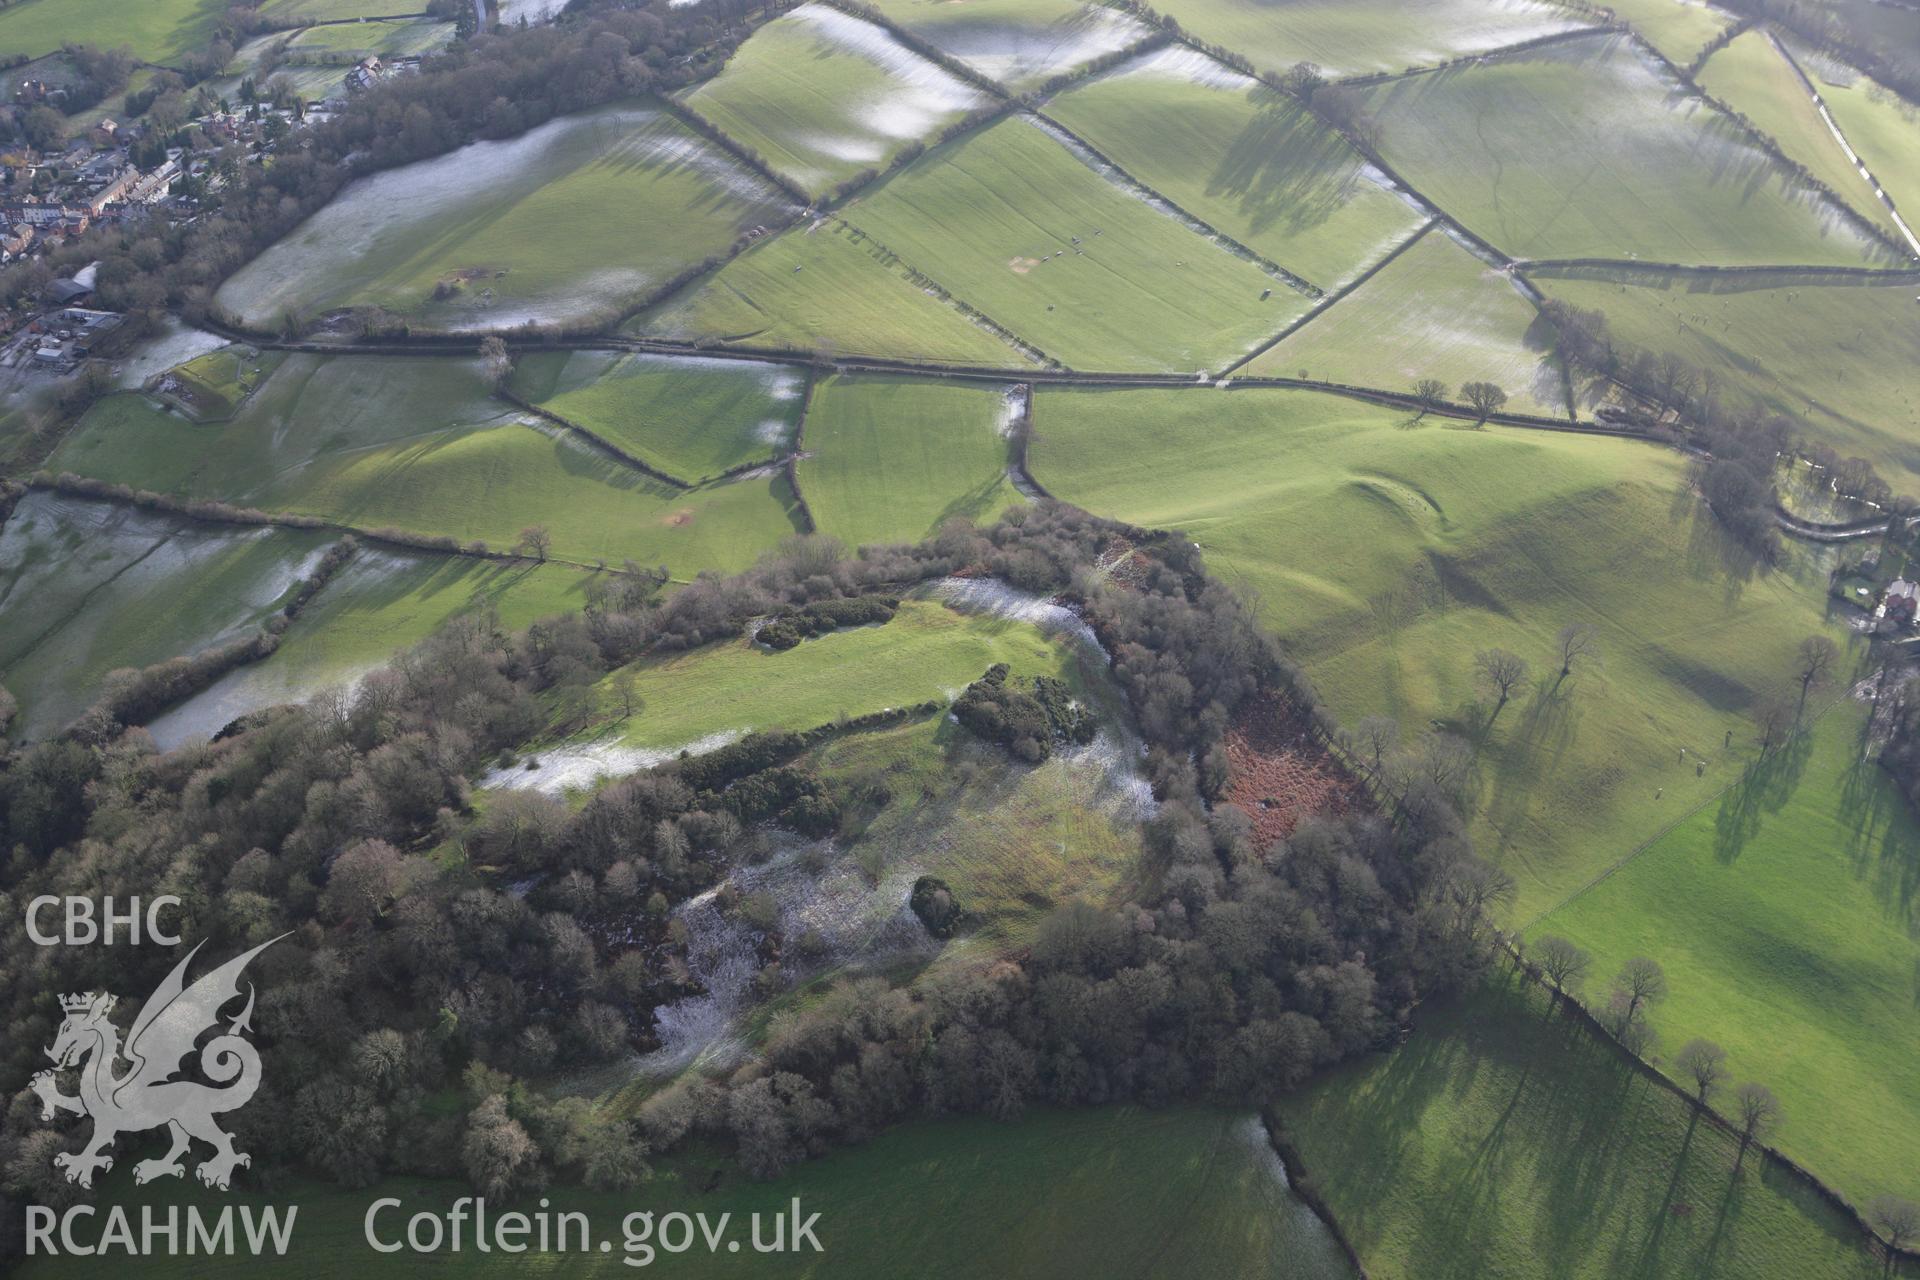 RCAHMW colour oblique photograph of Ffridd Faldwyn Hillfort, with frost, from north. Taken by Toby Driver on 18/12/2011.